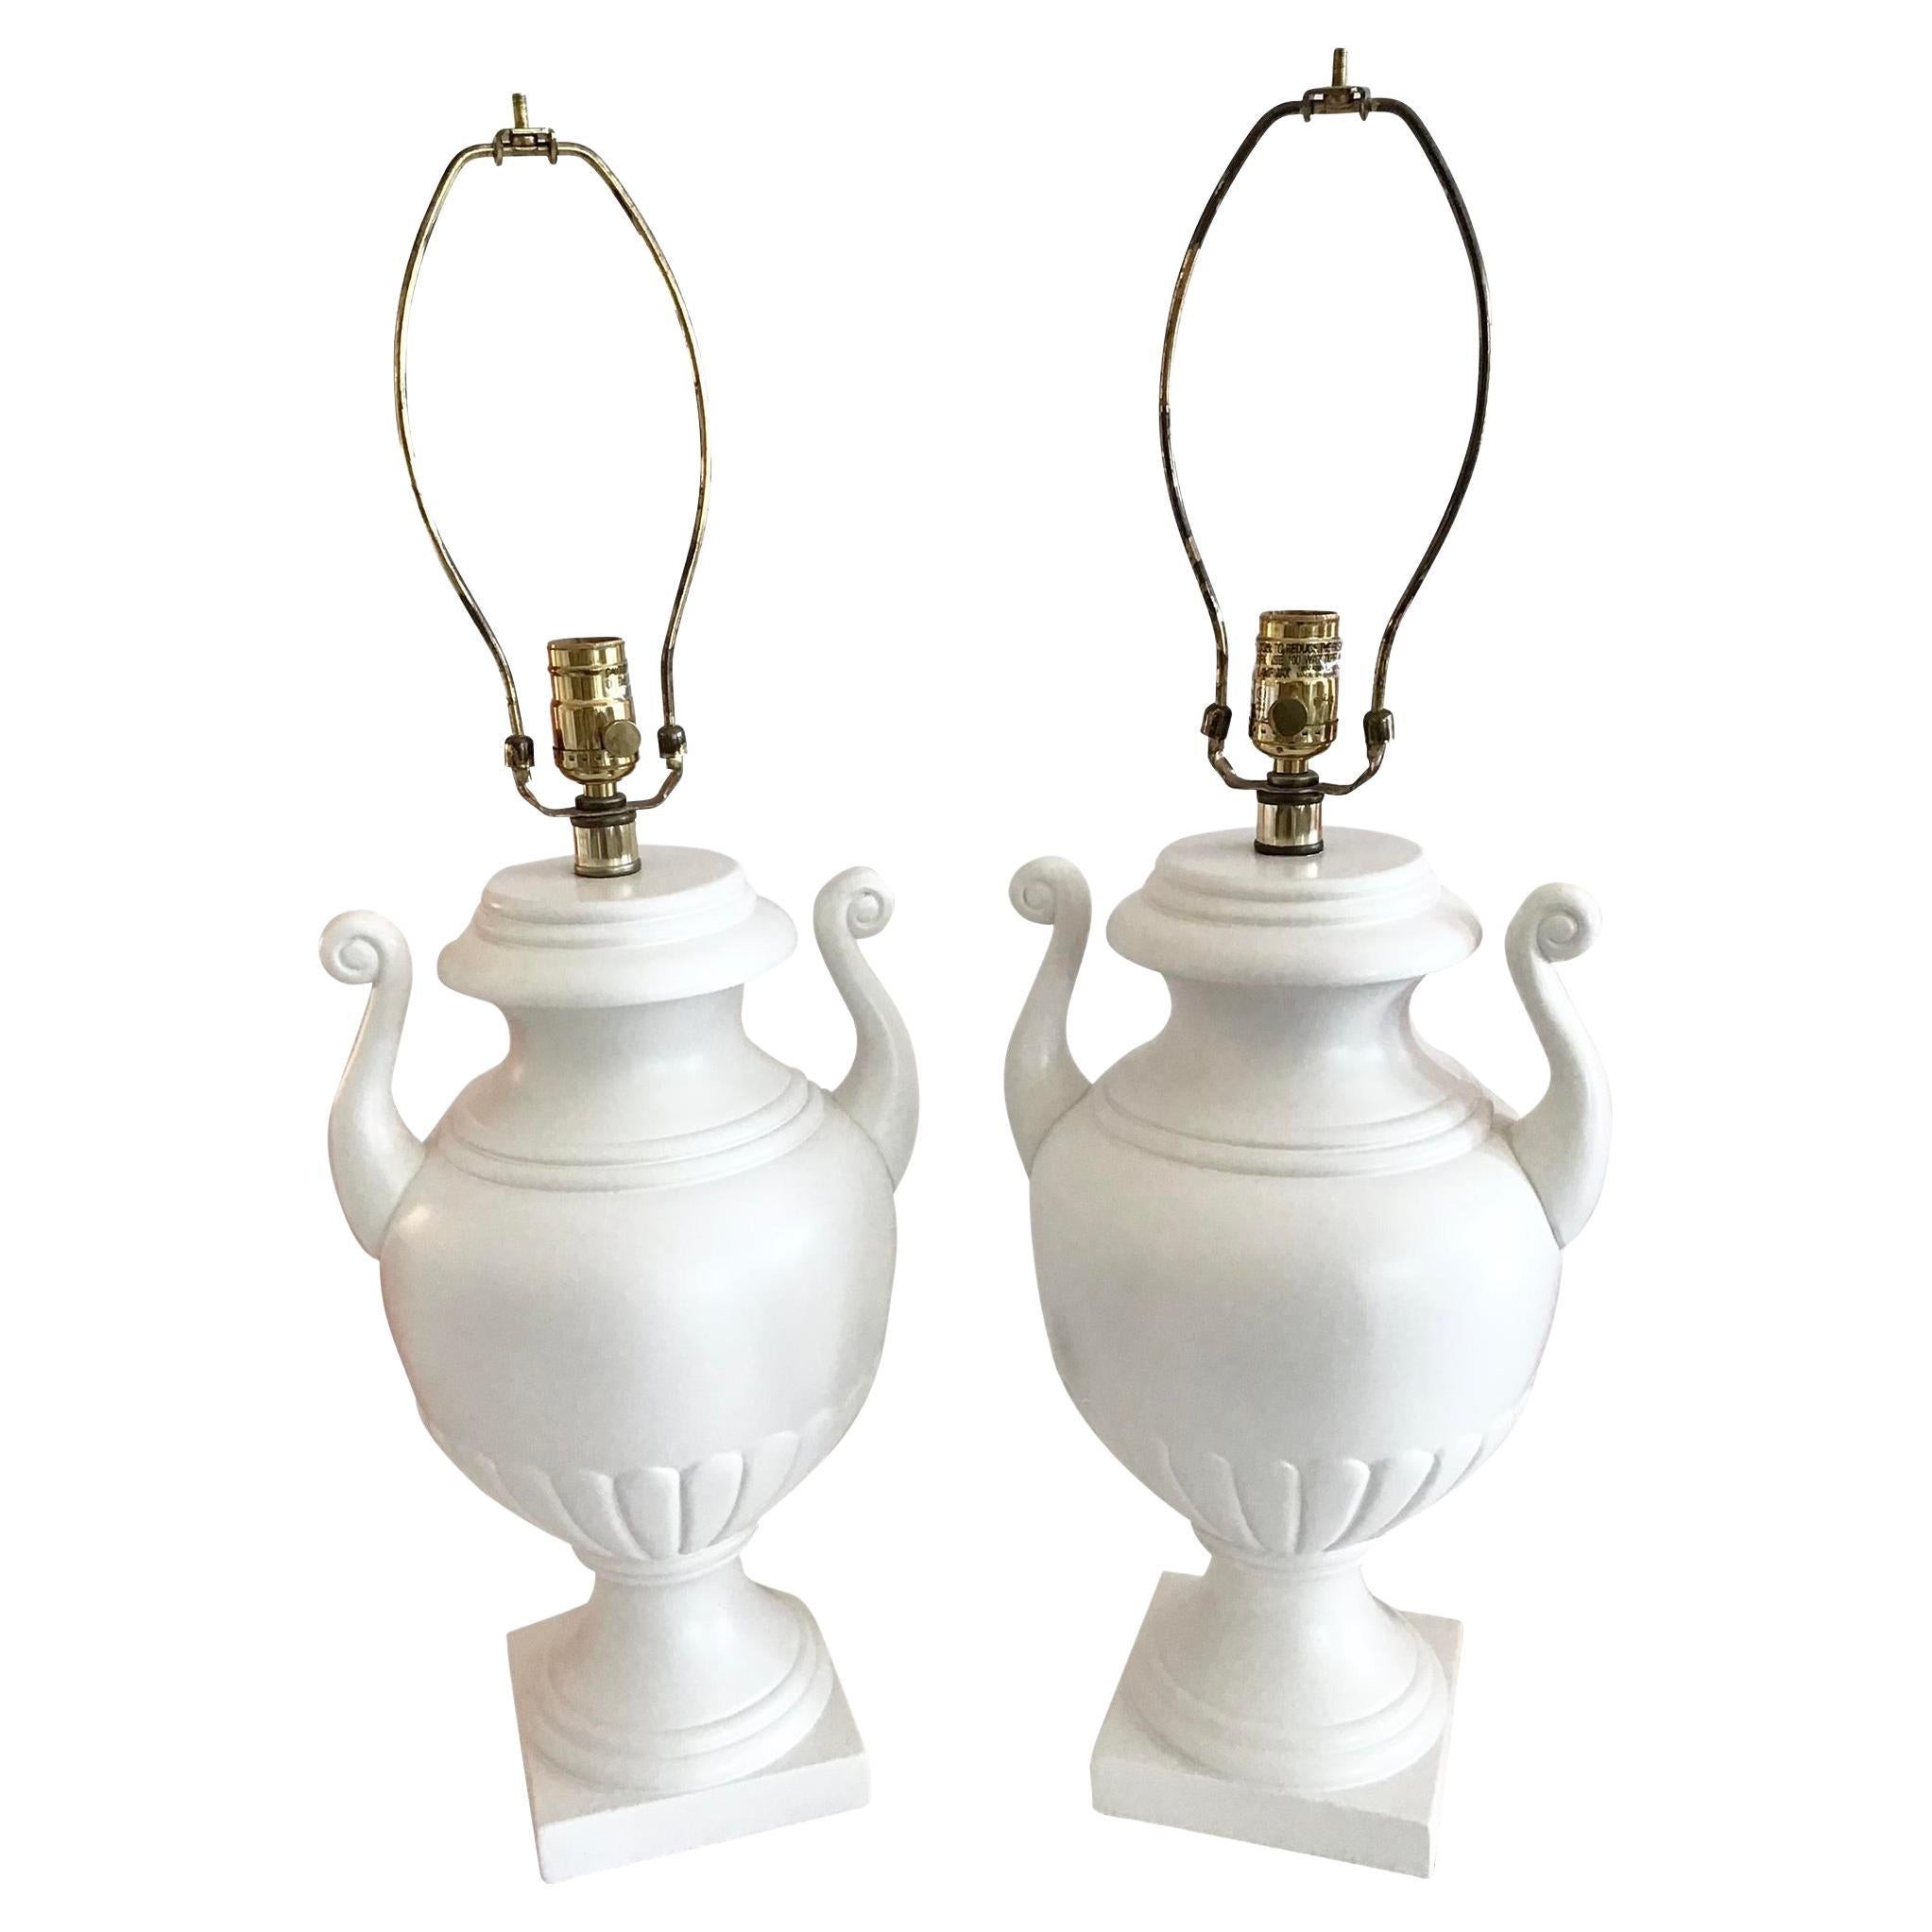 Todd Hase White Urn Table Lamps, a Pair